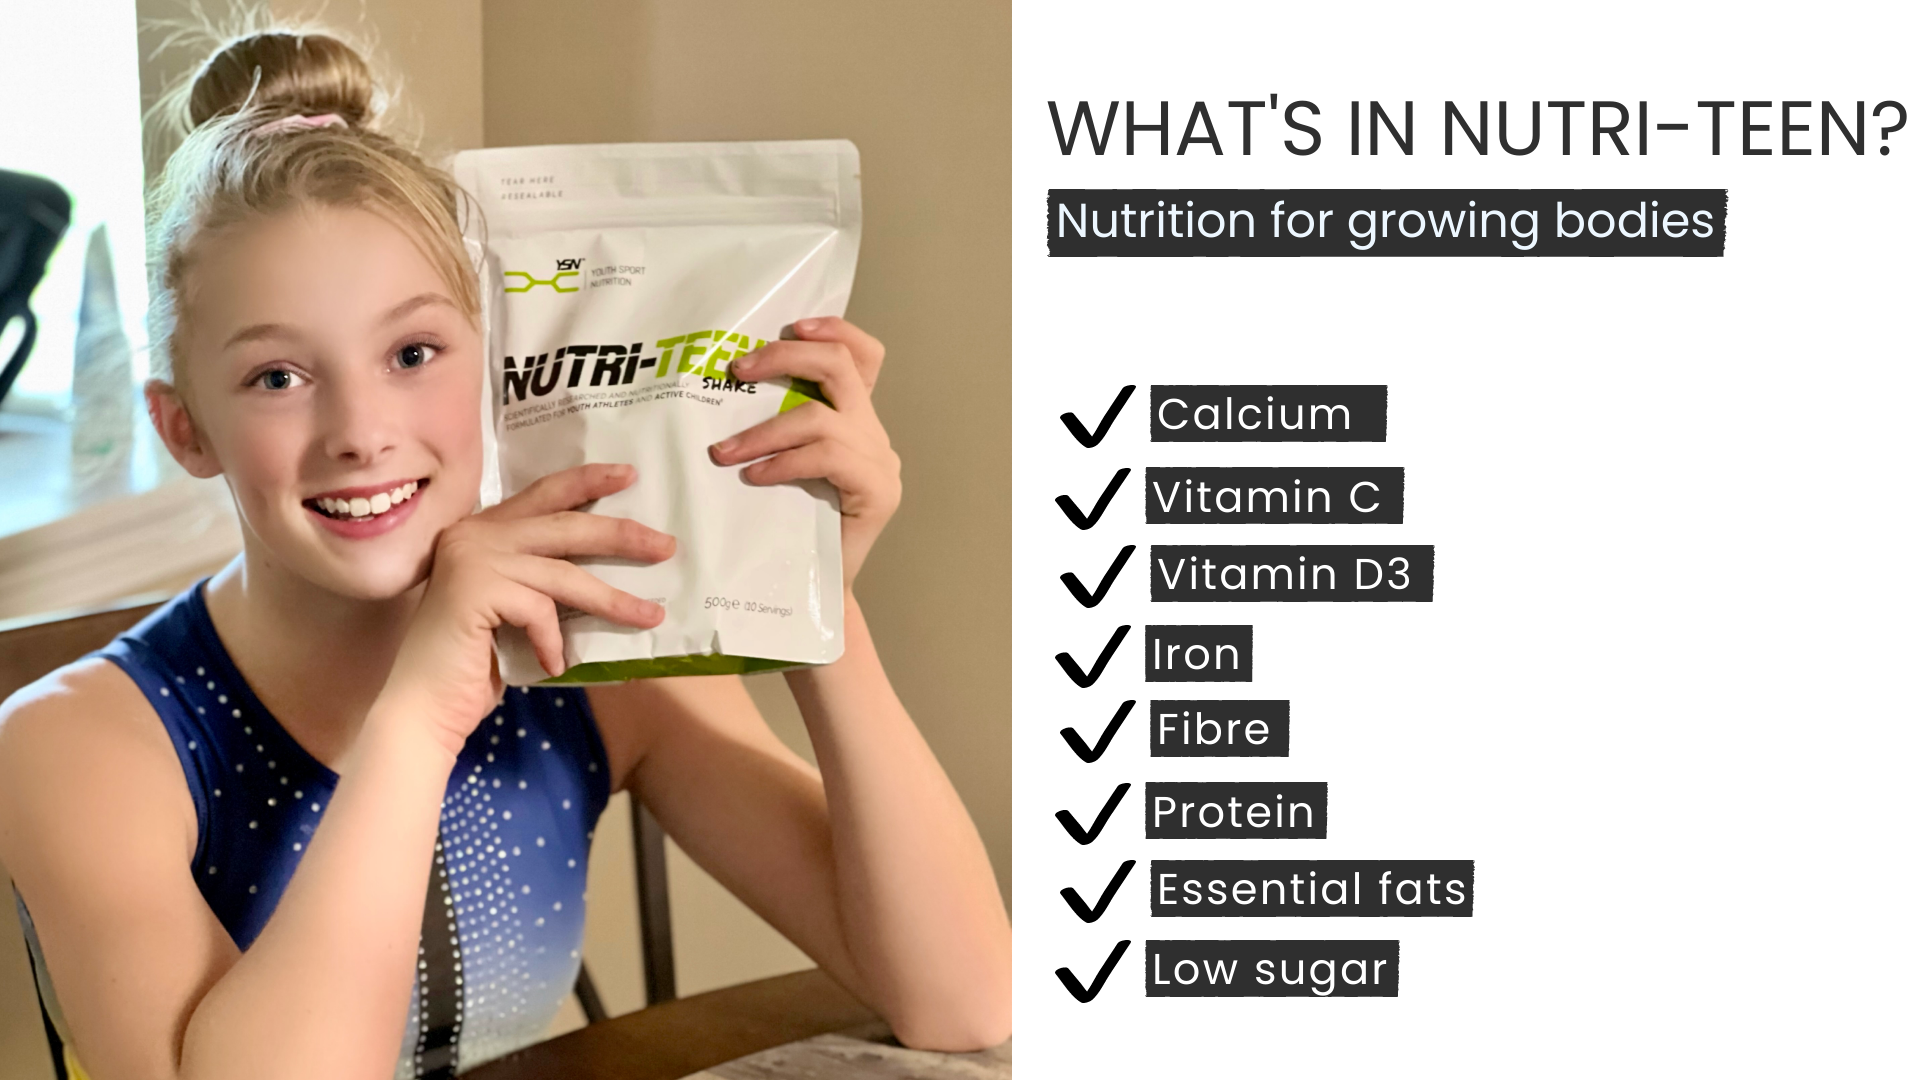 What is in NUTRI-TEEN Shakes for kids?